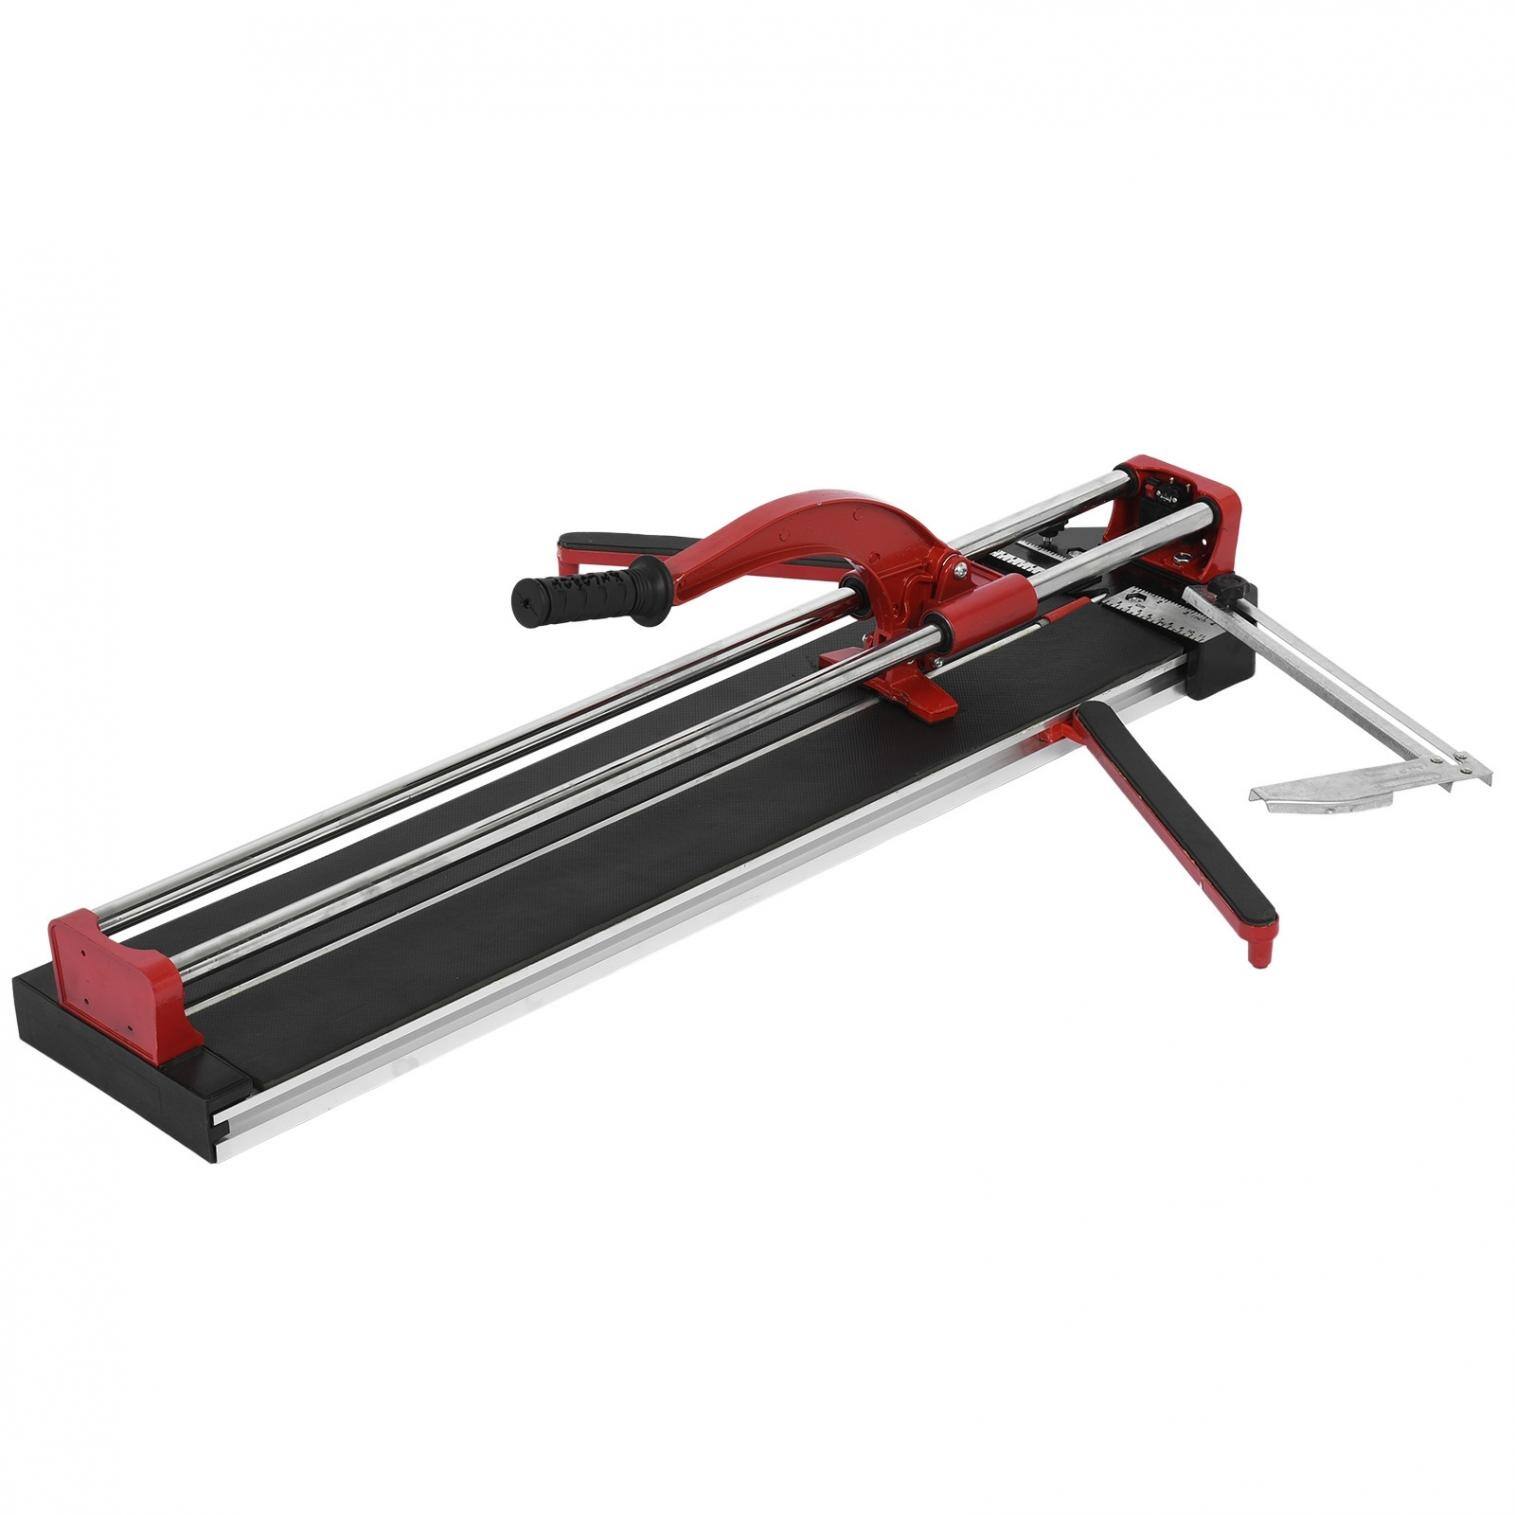 32 Inches Professional Manual Tile Cutter Porcelain Floor Tiles Cutting Machine